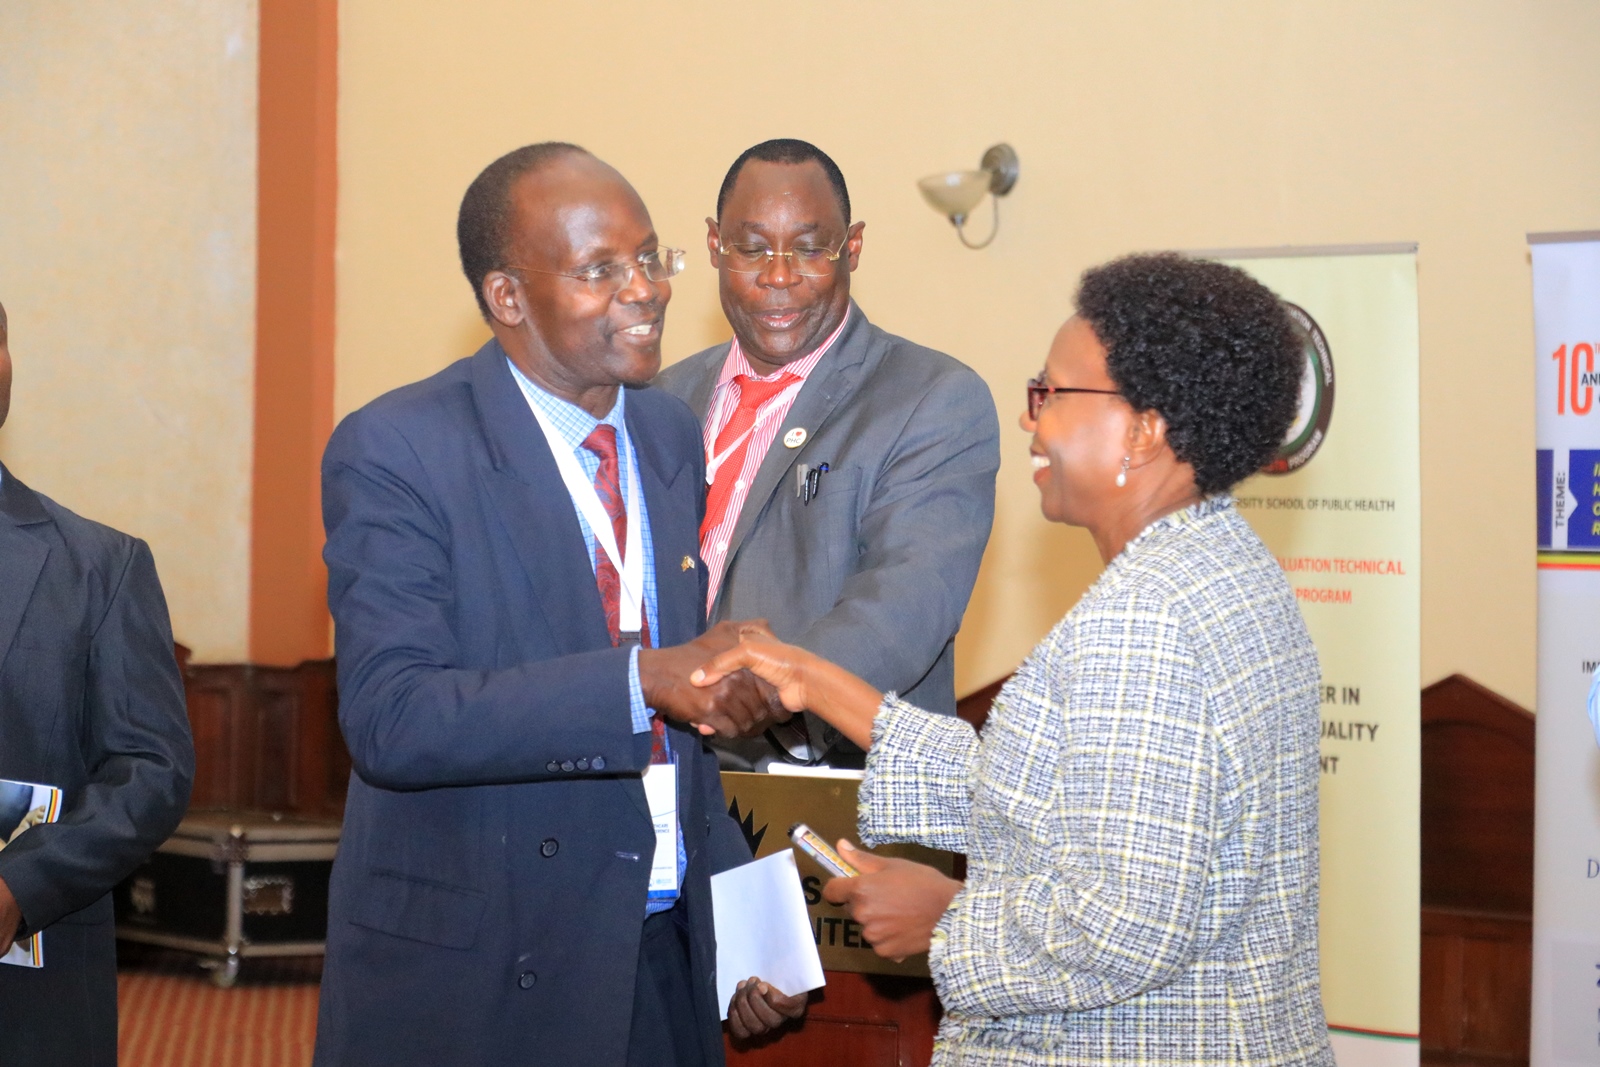 The Minister of Health-Hon. Dr. Jane Ruth Aceng Ocero (Right) shakes hands with Prof. Christopher Garimoi Orach during the launch event on 12th March 2024. Launch of the first ever Harmonized Health Facility Assessment (HHFA) jointly conducted by the School of Public Health, Makerere University, Kampala UgandaH and the Ministry of Health during the 10th Annual National Health Care Quality Improvement Conference, 12th March 2024, Imperial Resort Beach Hotel, Entebbe Uganda, East Africa.